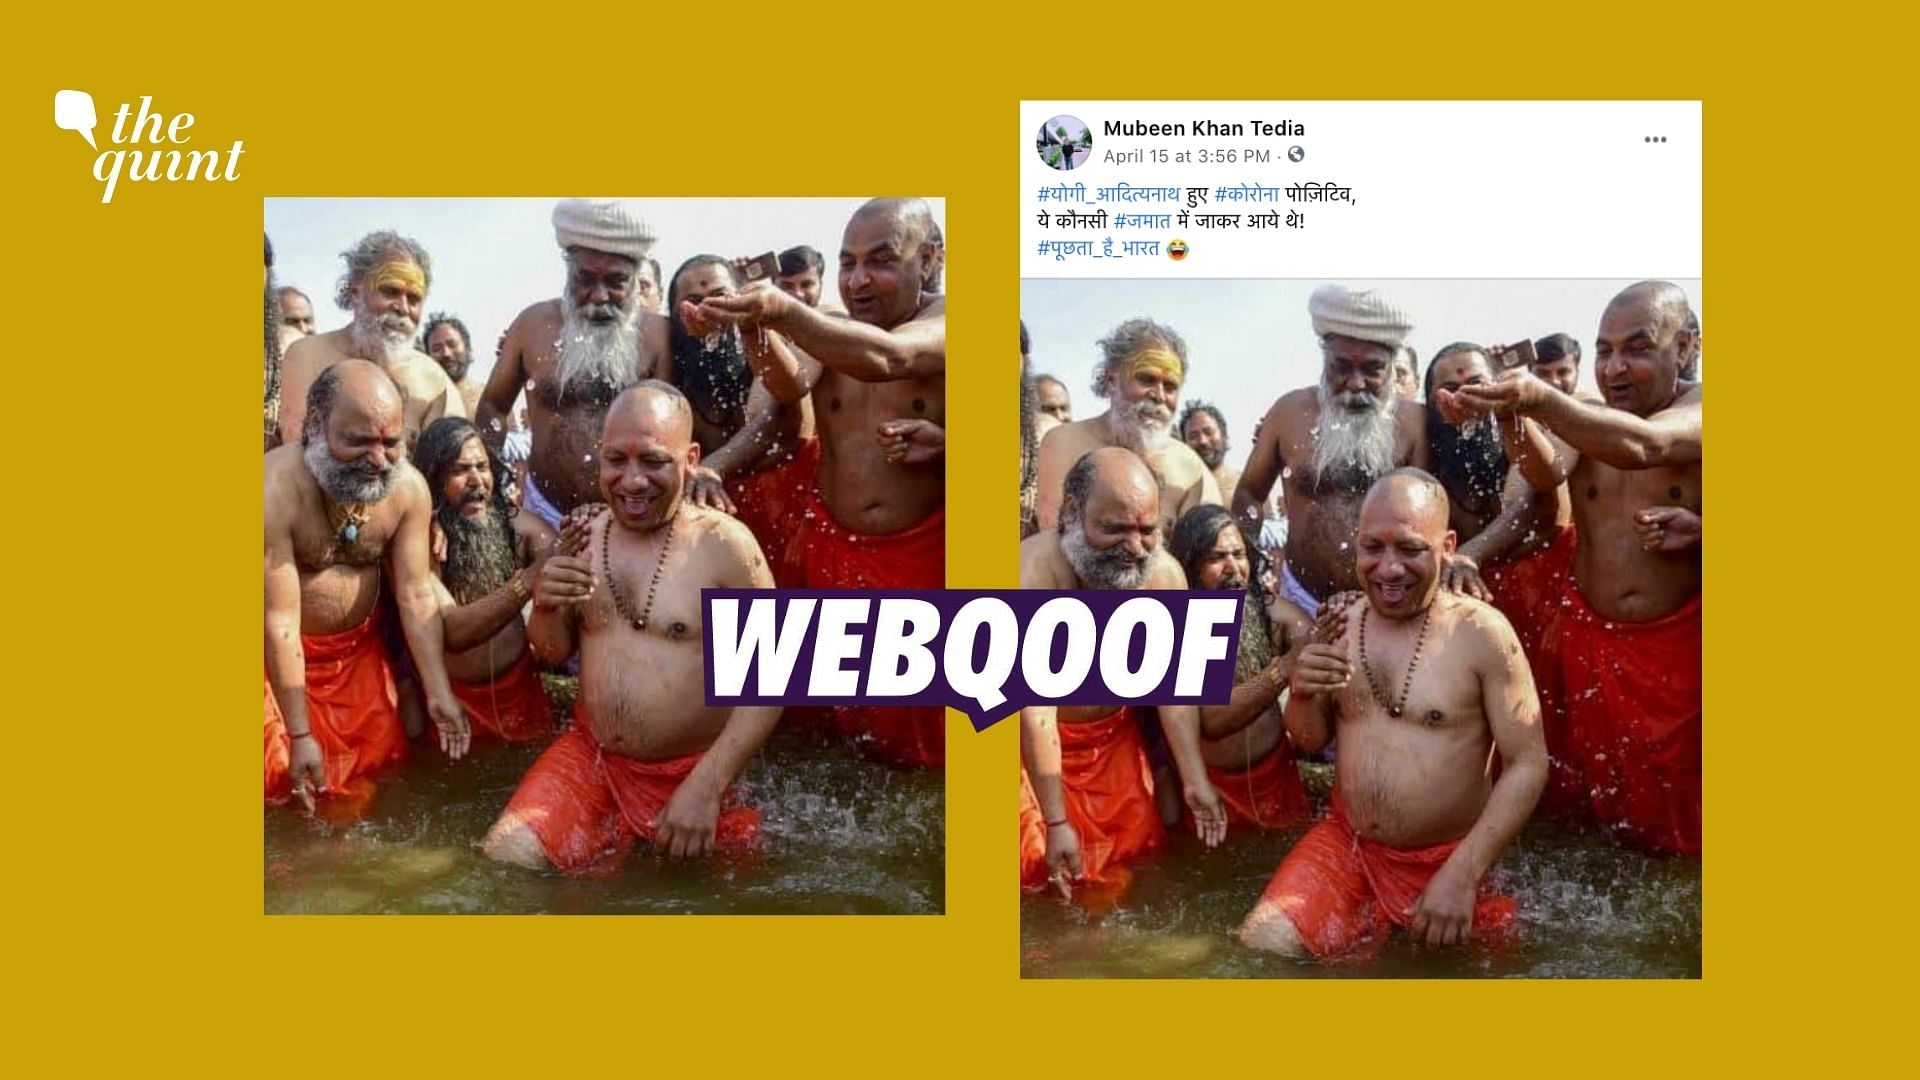 An old image of Uttar Pradesh Chief Minister taking a dip at Kumbh Mela in Prayagraj in 2019 is being shared with a false claim.